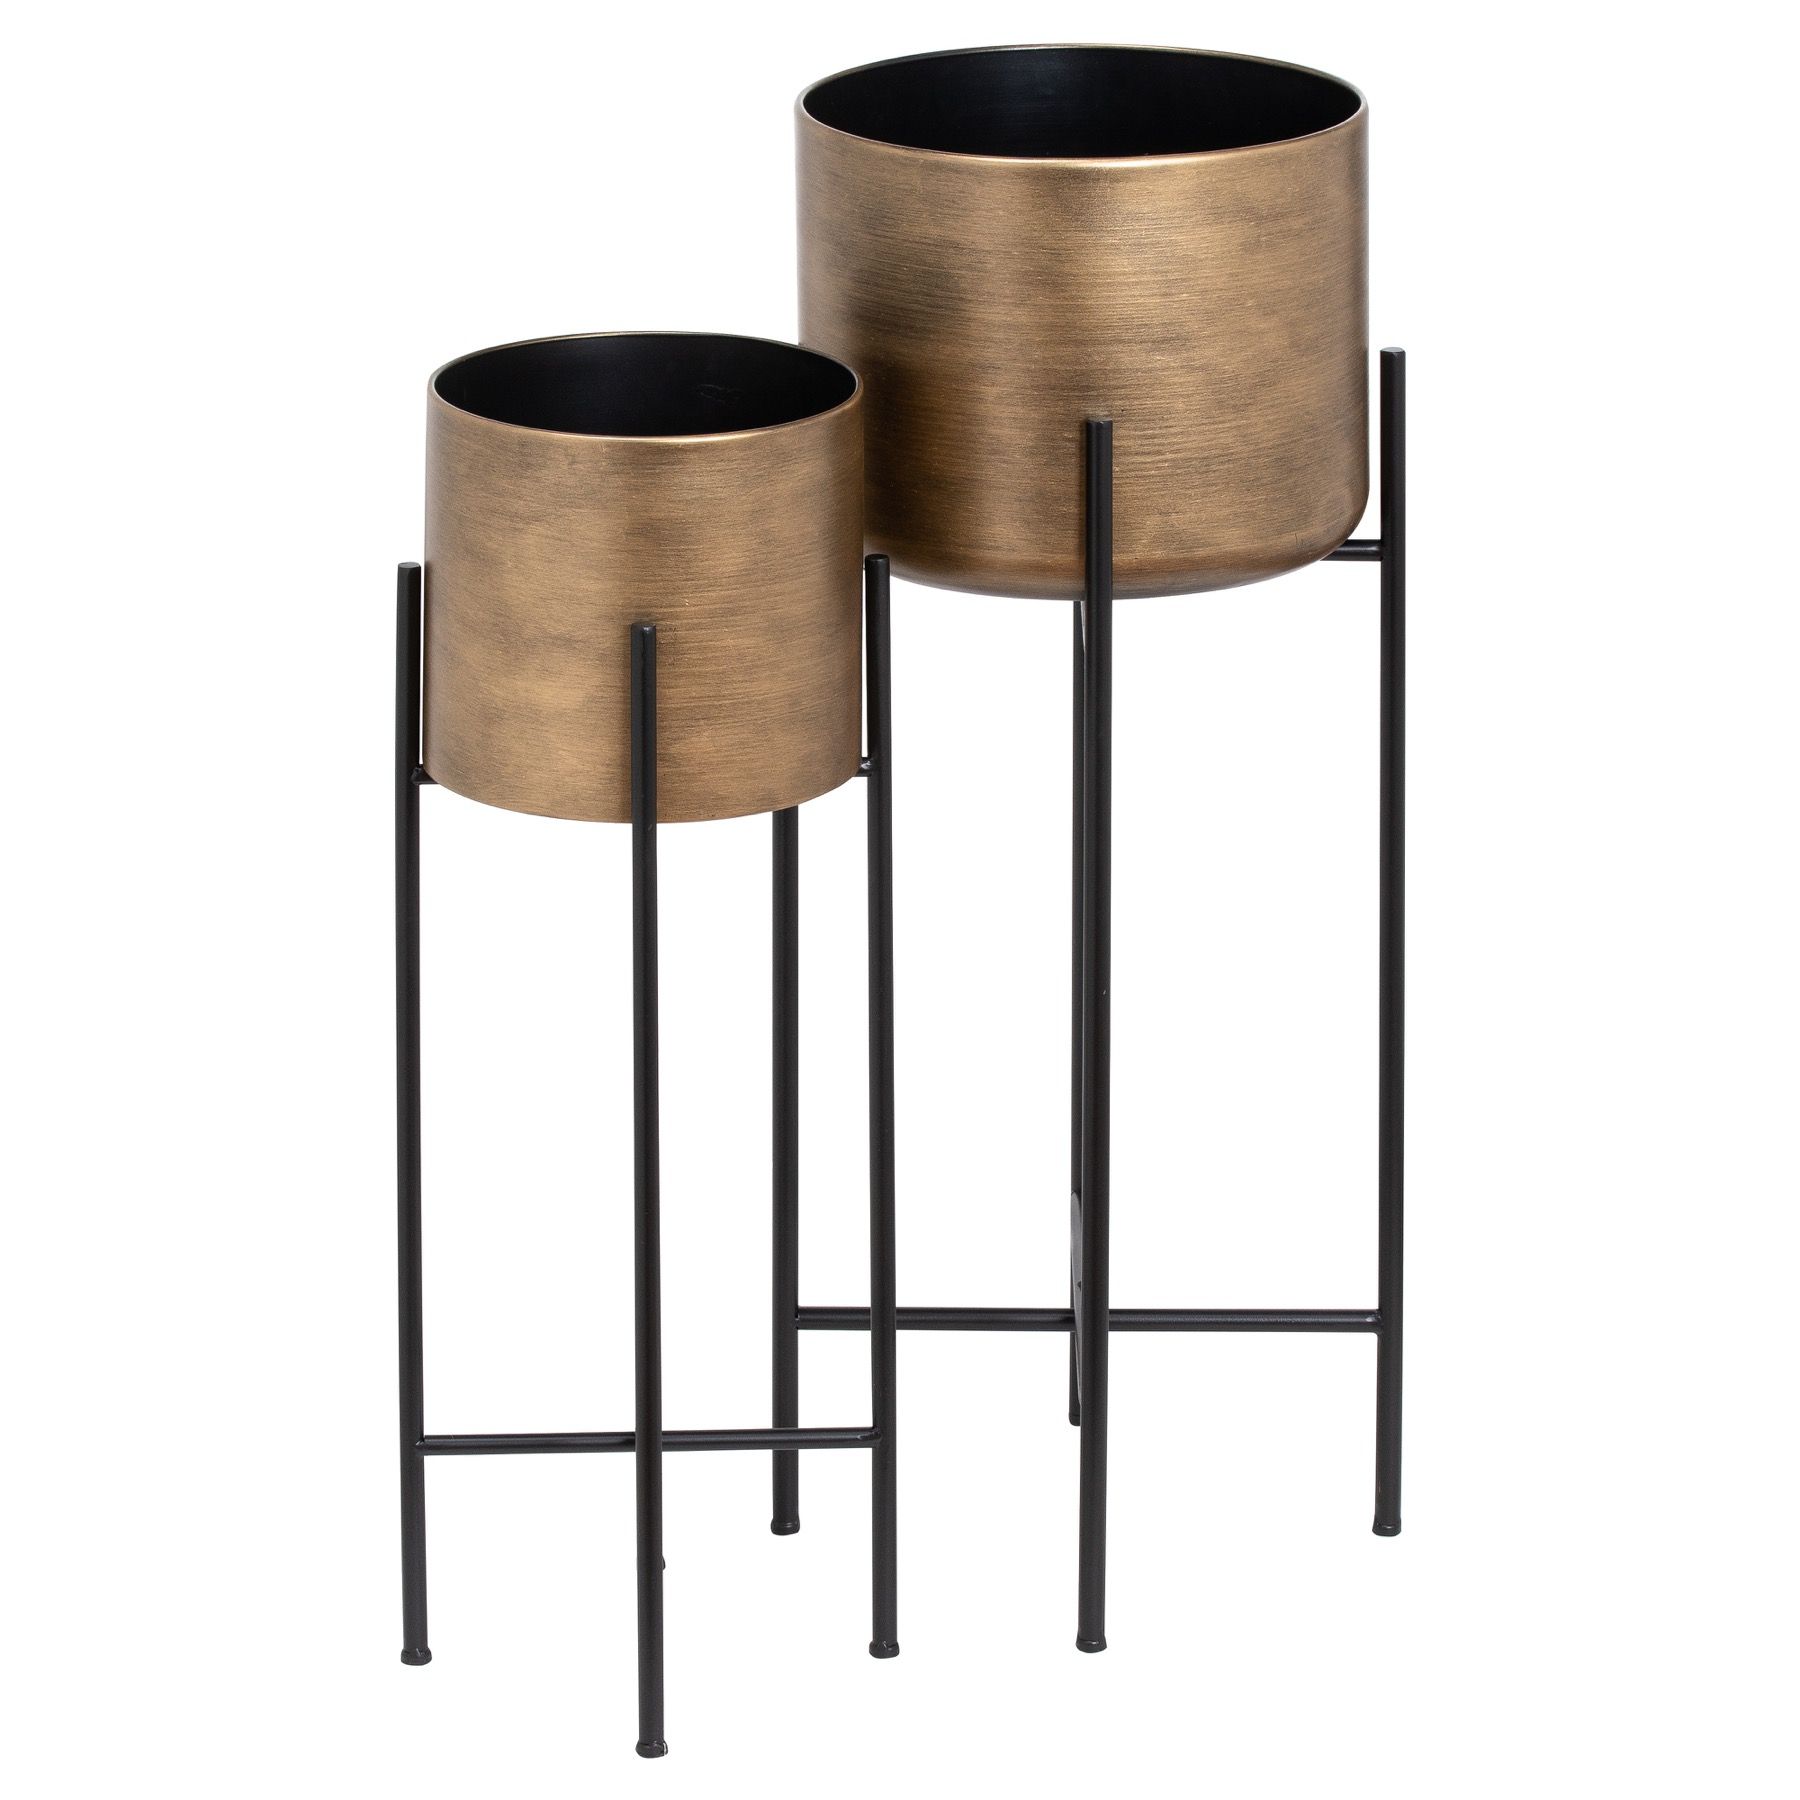 Set Of Two Bronze Planters On Stand | Wholesalehill Interiors In Bronze Plant Stands (View 7 of 15)